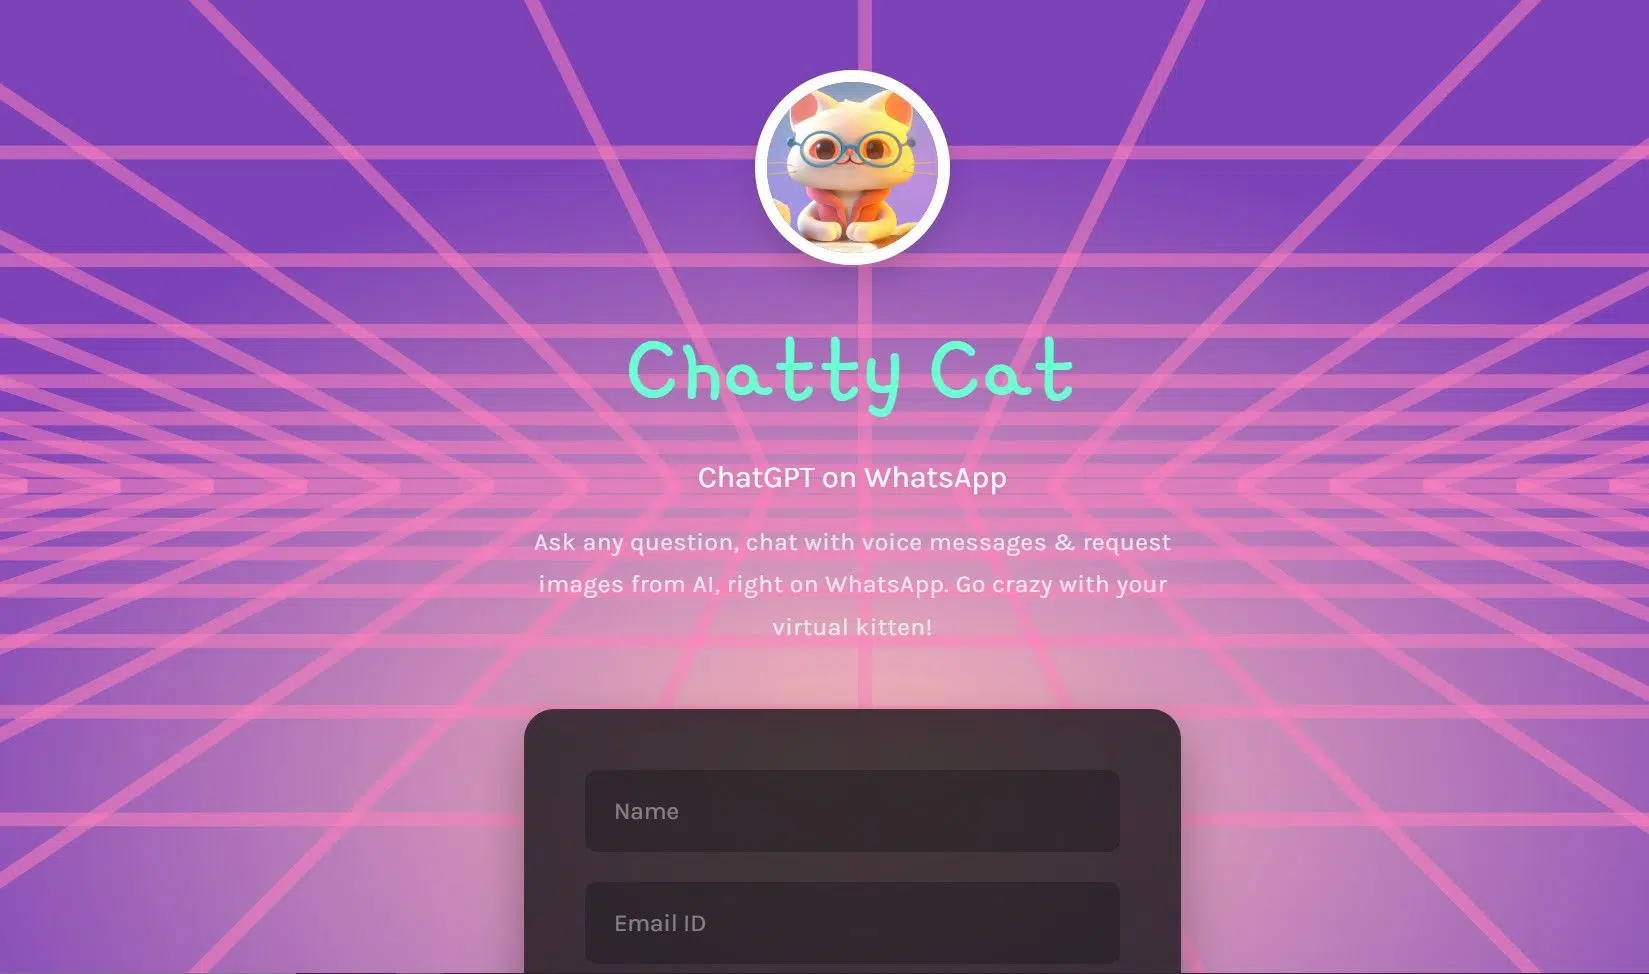 Chatty Catwebsite picture